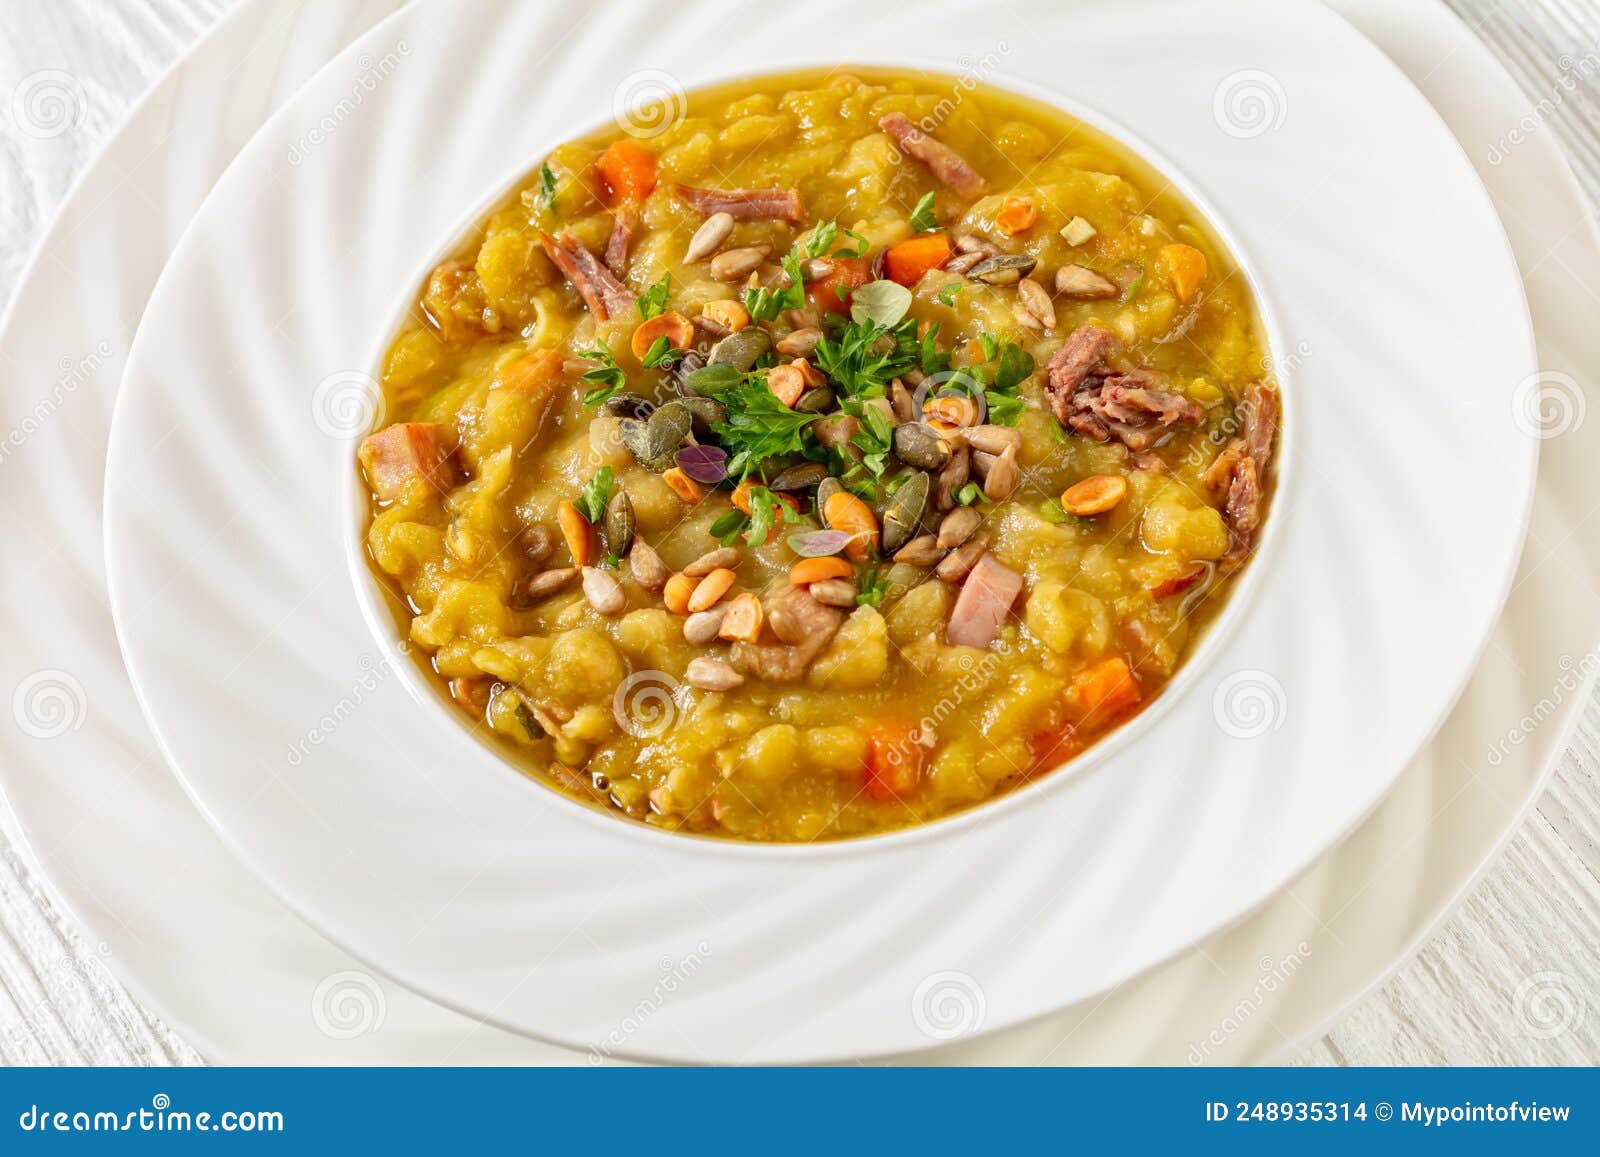 Finnish Split Pea Soup Hernekeitto with Pork Meat Stock Photo - Image ...